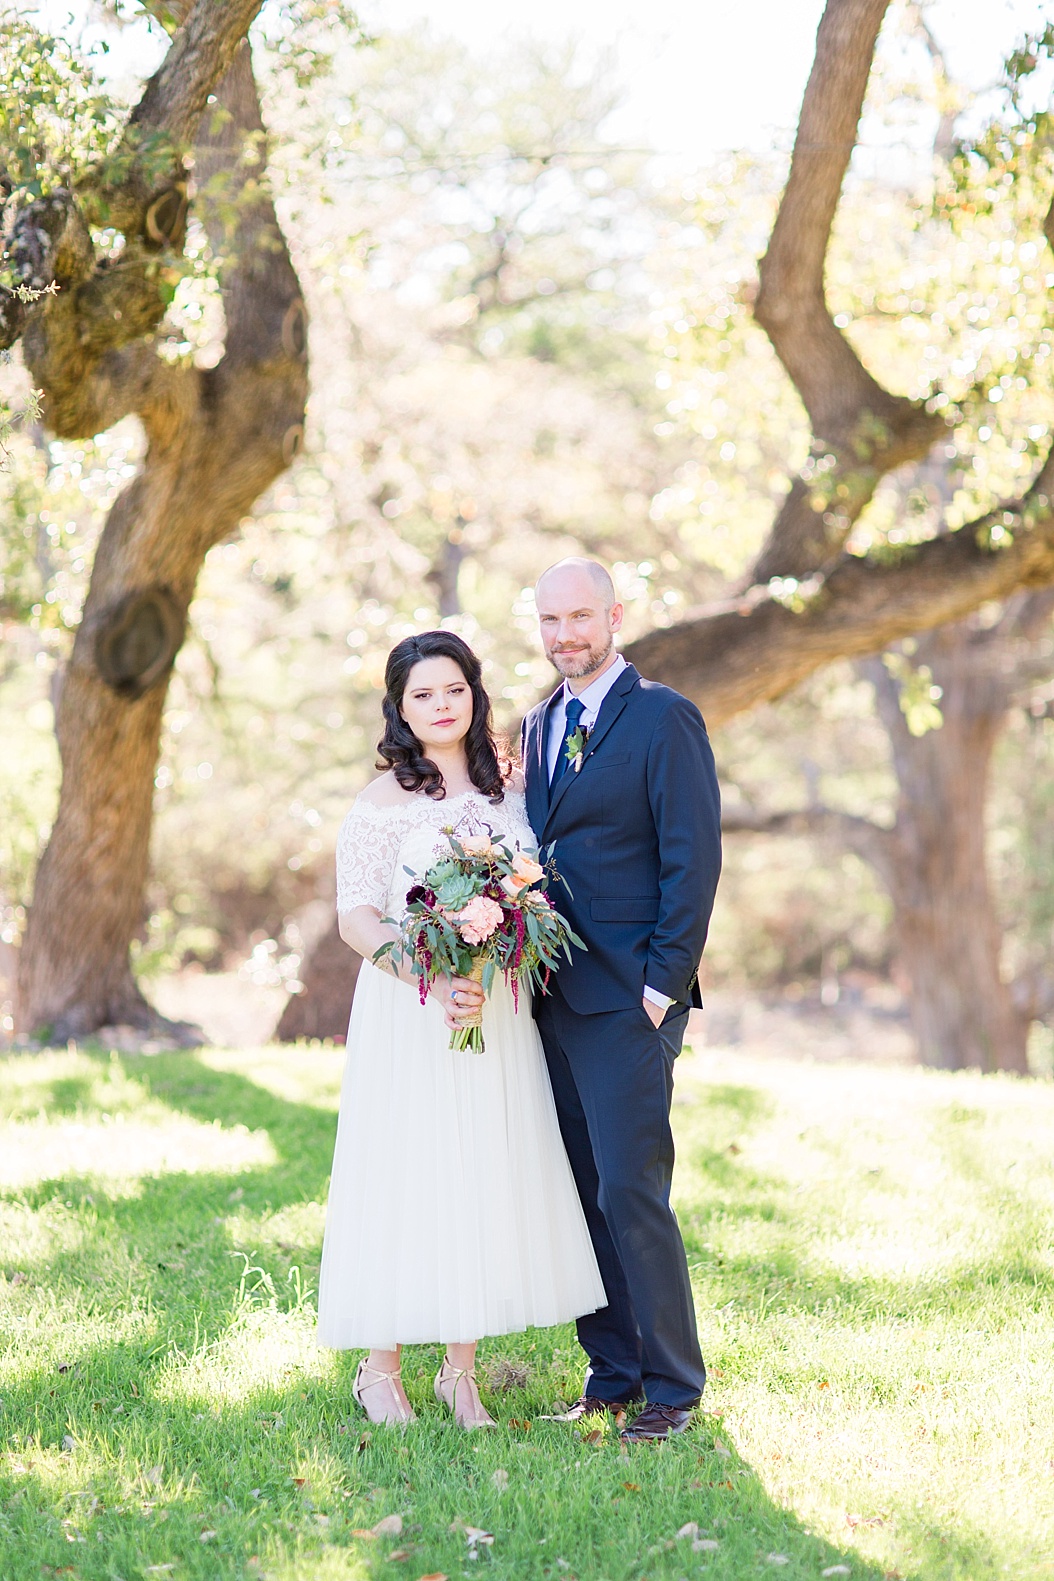 A Modern Sisterdale Dancehall Wedding in Boerne Texas by Allison Jeffers Wedding Photography featuring a sage, burgundy, and pale pink color palette 0042